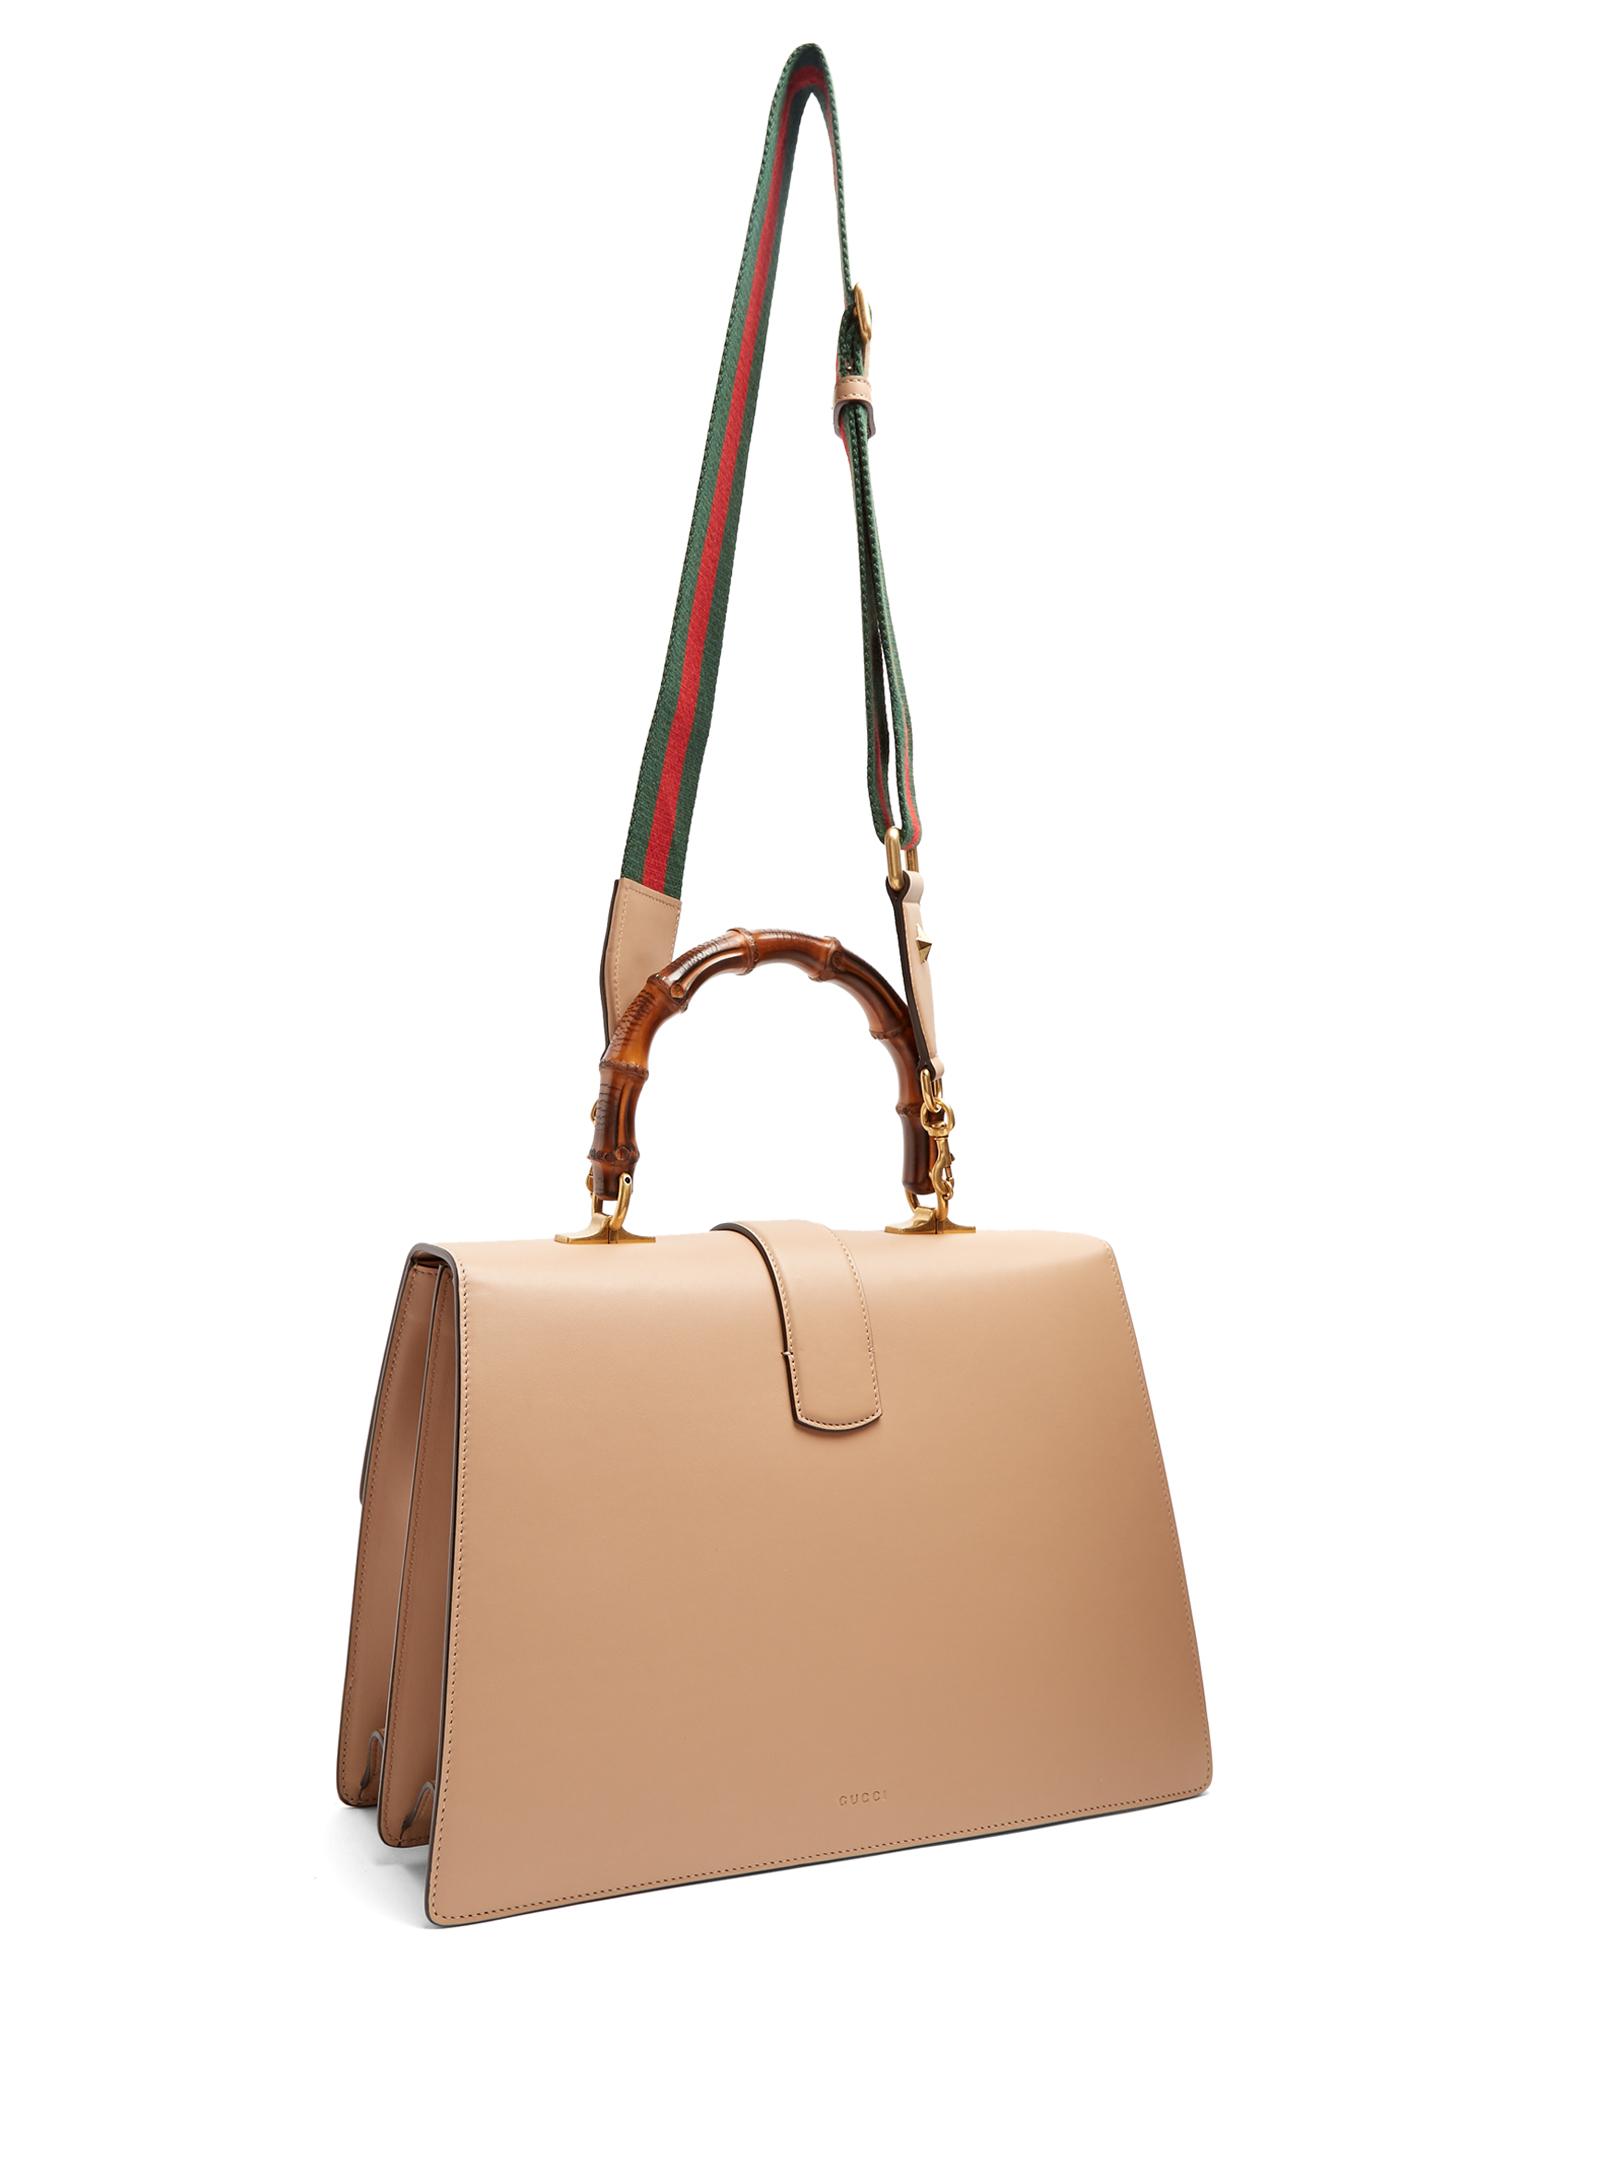 Lyst - Gucci Dionysus Bamboo Large Leather Shoulder Bag